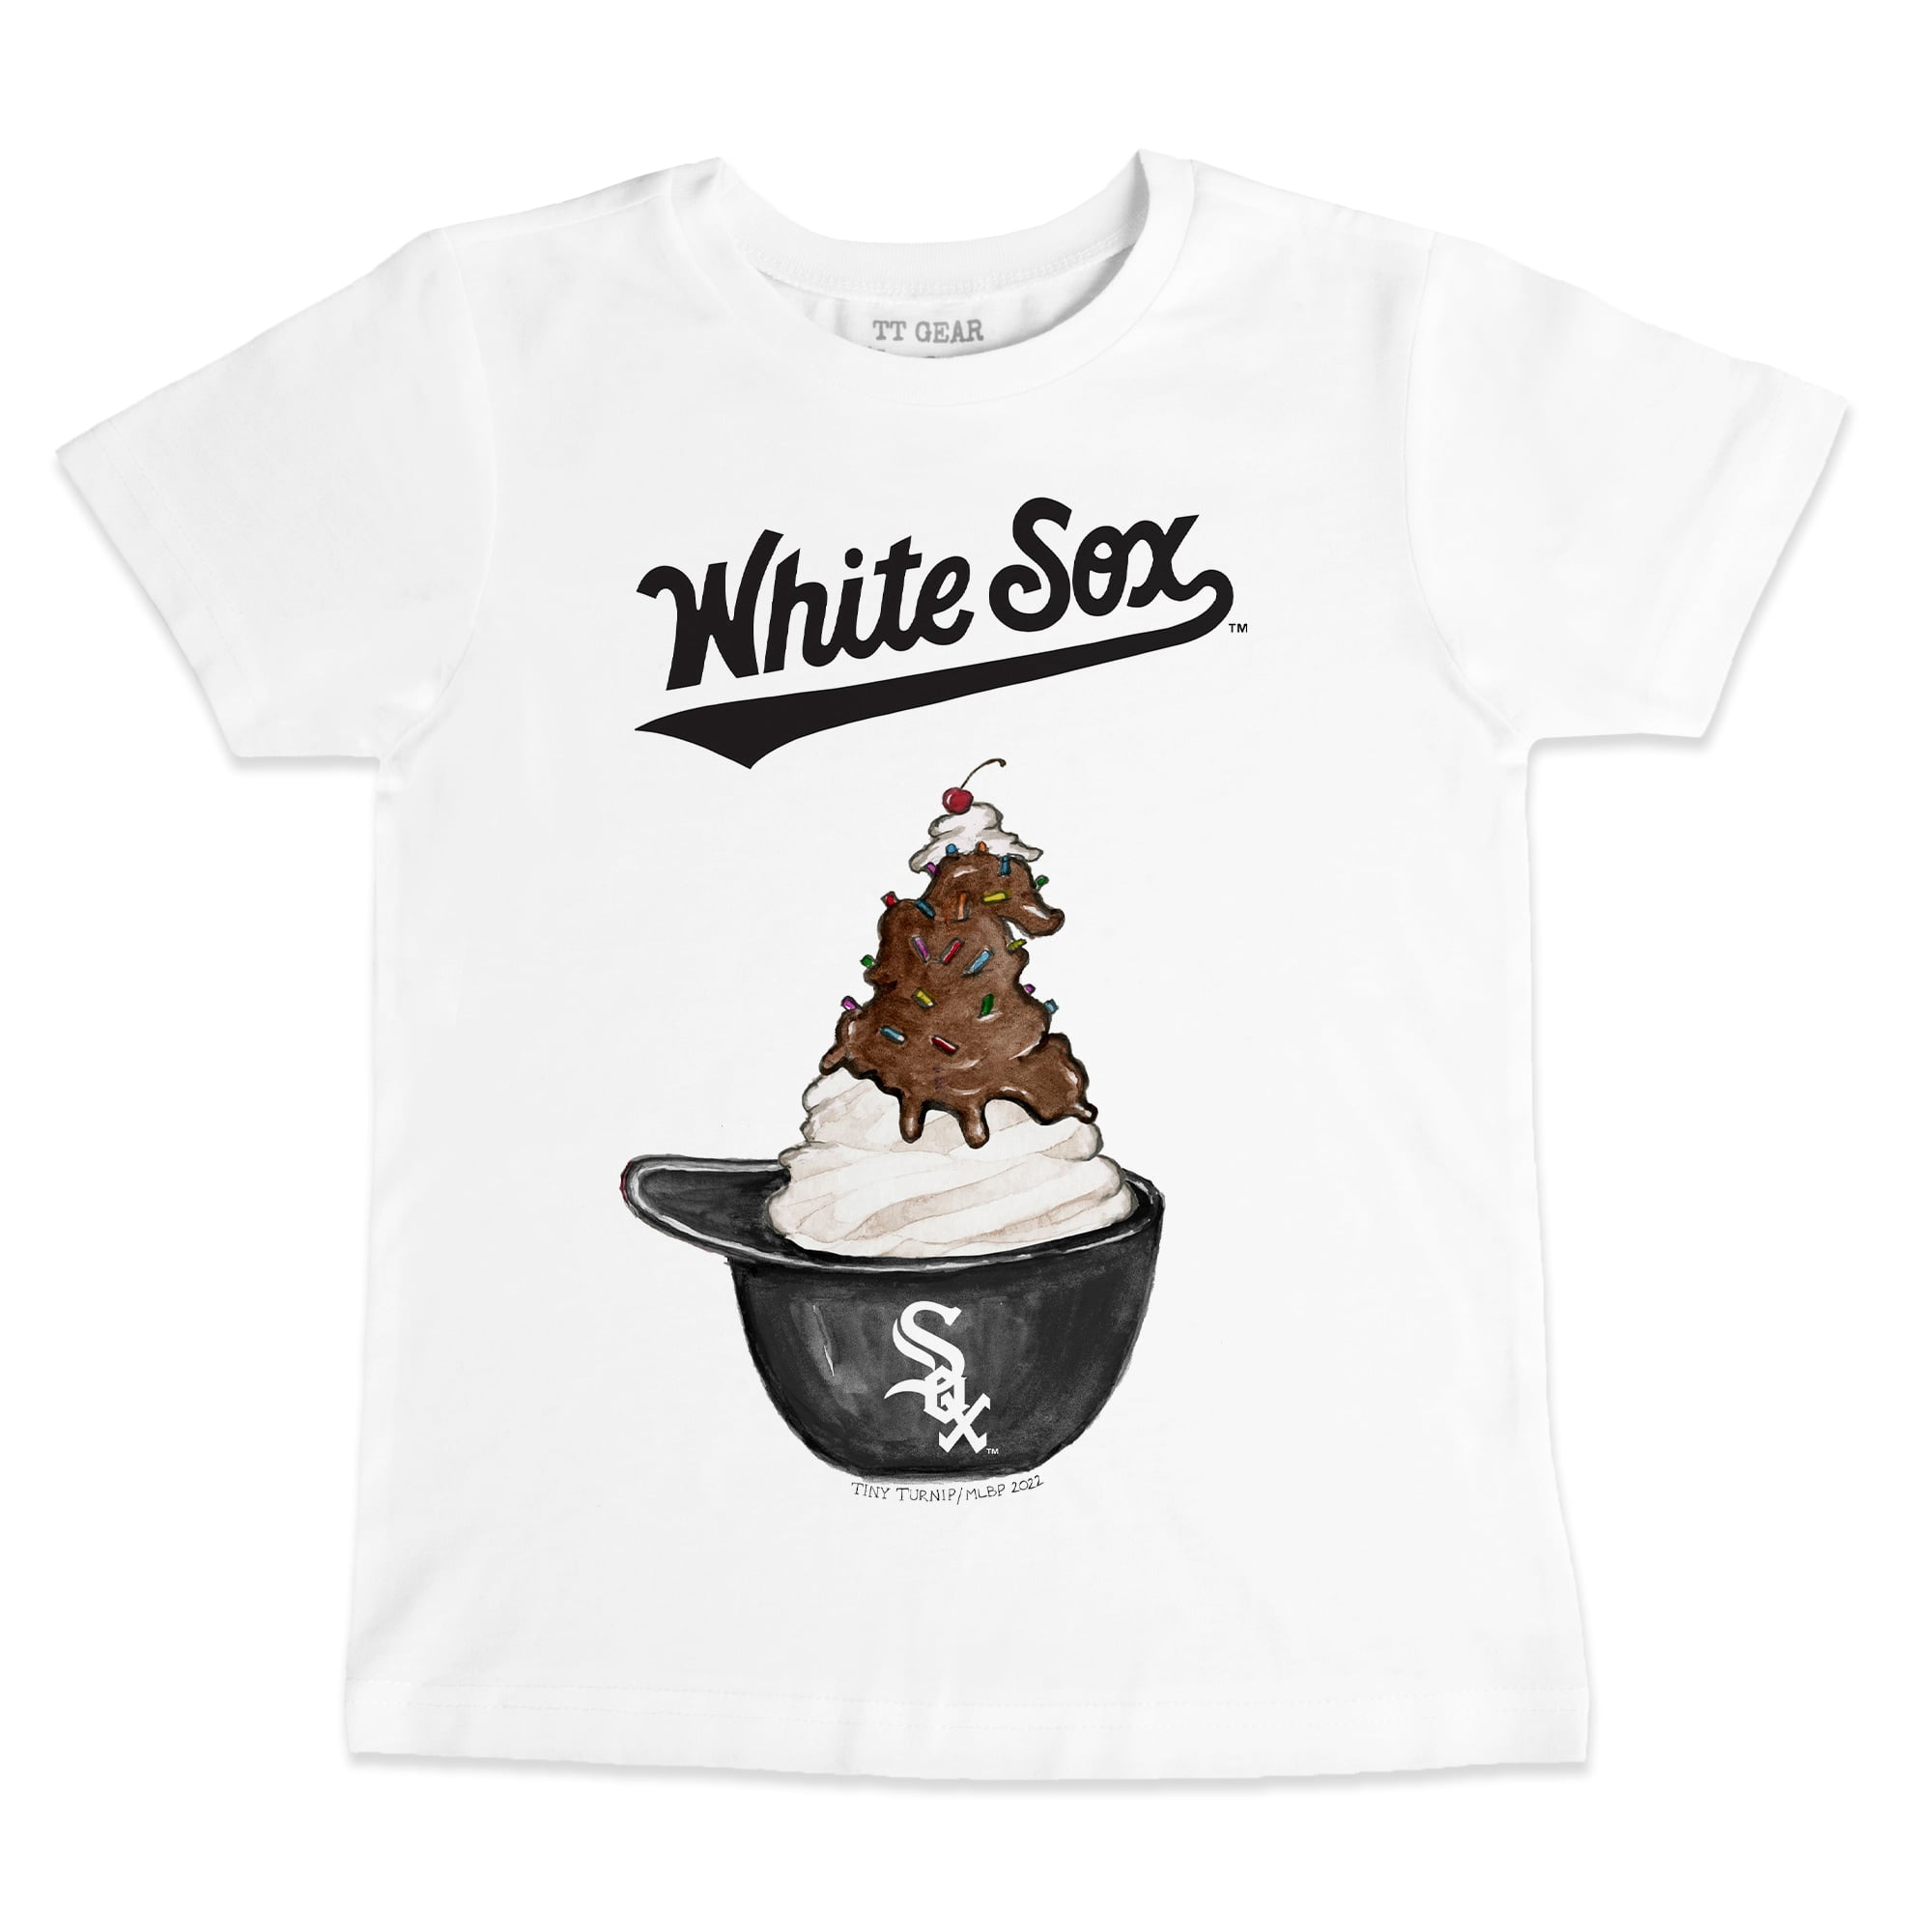 Chicago White Sox Apparel, White Sox Jersey, White Sox Clothing and Gear